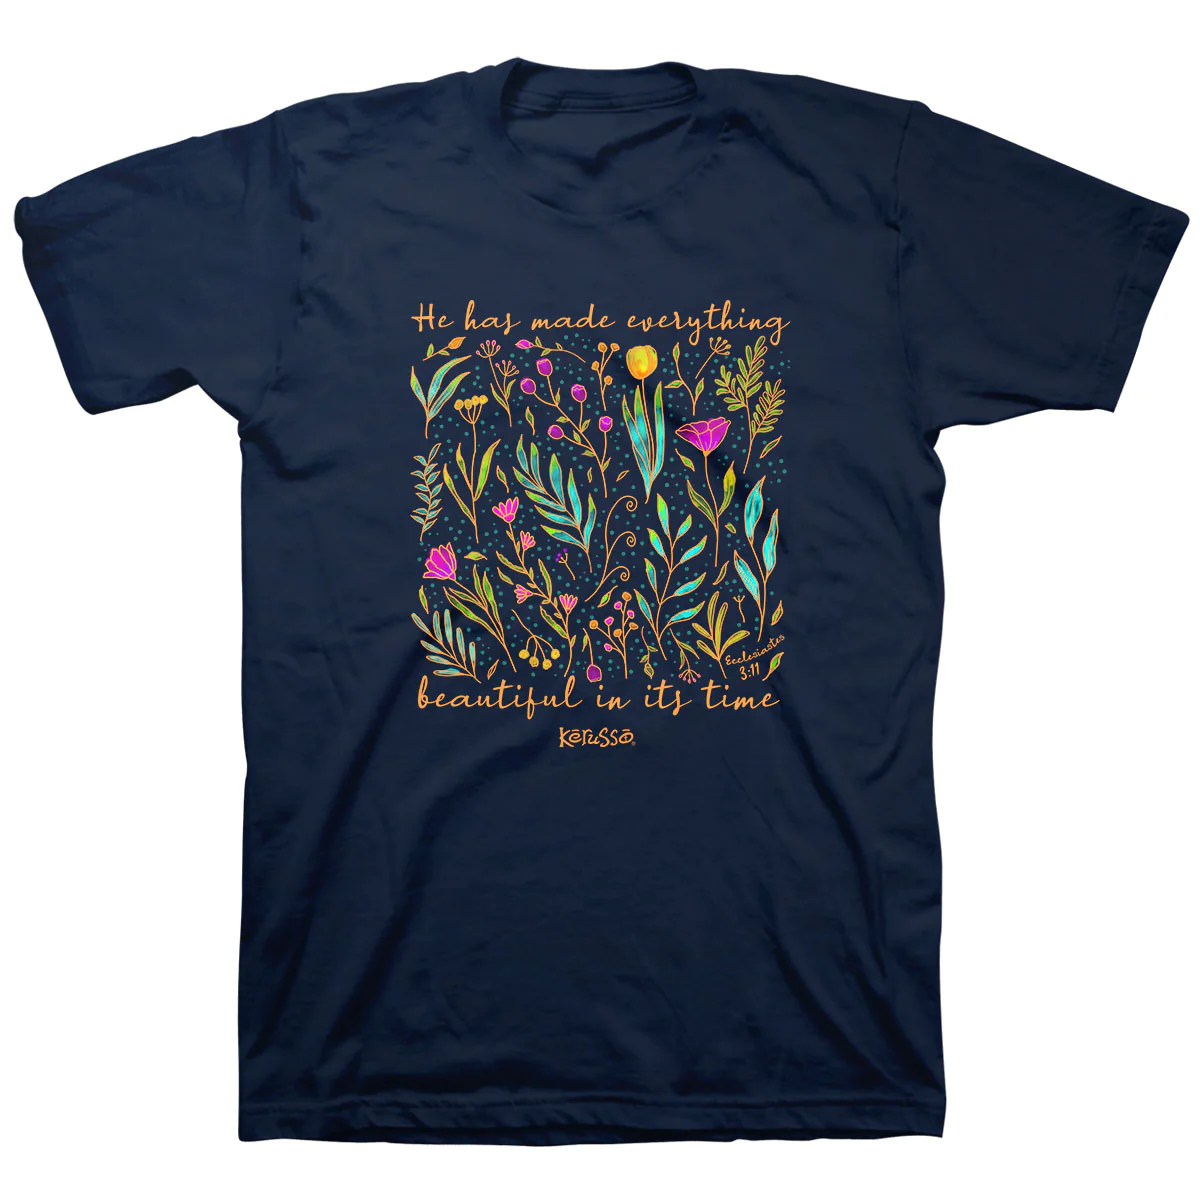 Everything is Beautiful (Ecclesiastes 3:11) T-Shirt